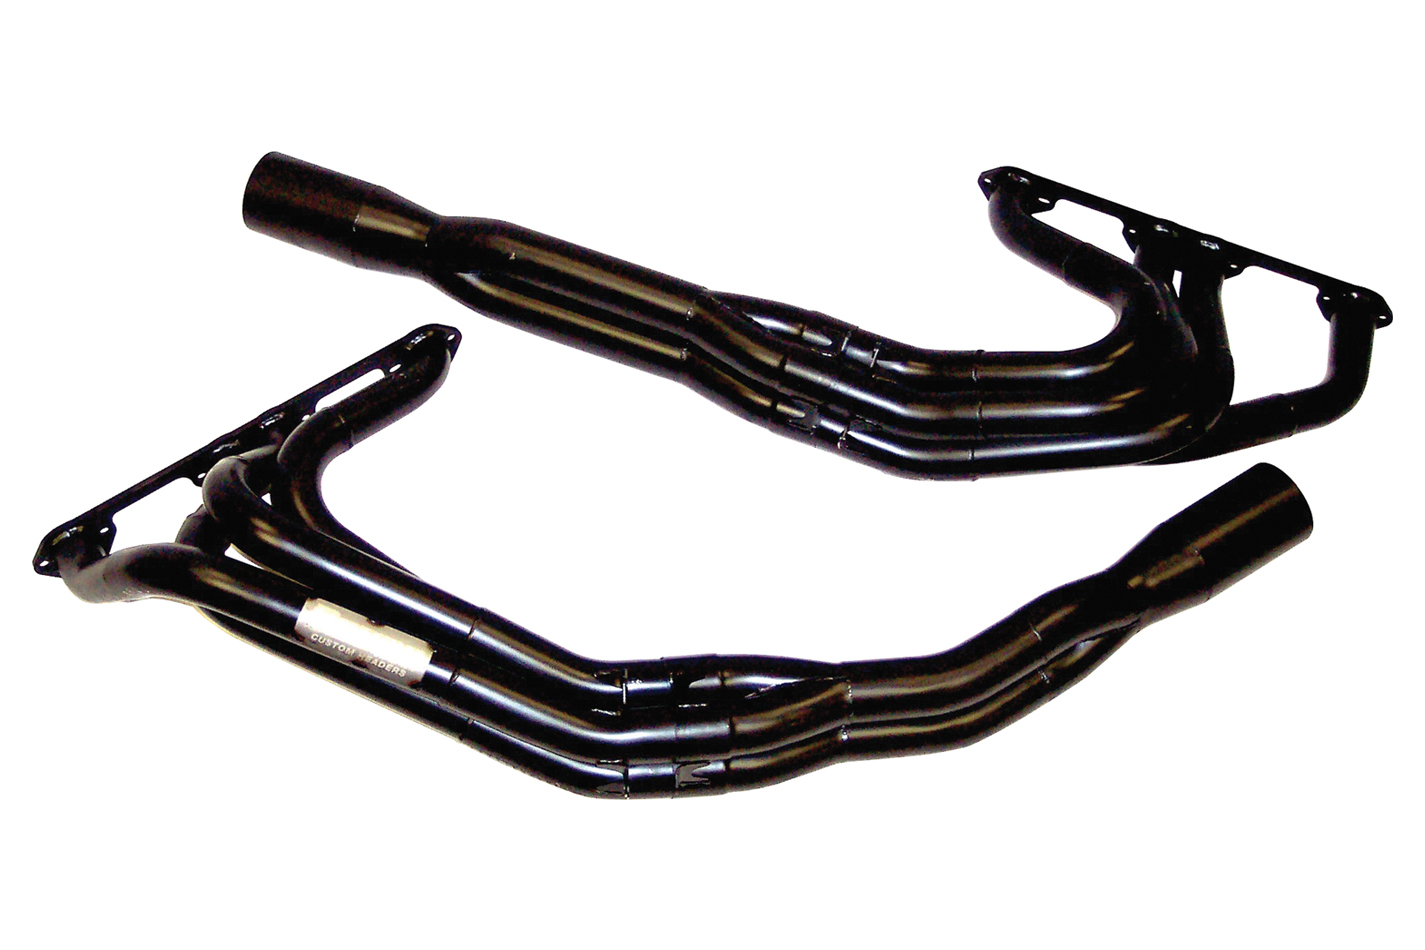 Beyea Headers IDM-23S1-C - Headers, IMCA-UMP Modified, 1-5/8 to 1-3/4 in Primary, 3 in Collector, Steel, Black Paint, Small Block Chevy, Kit